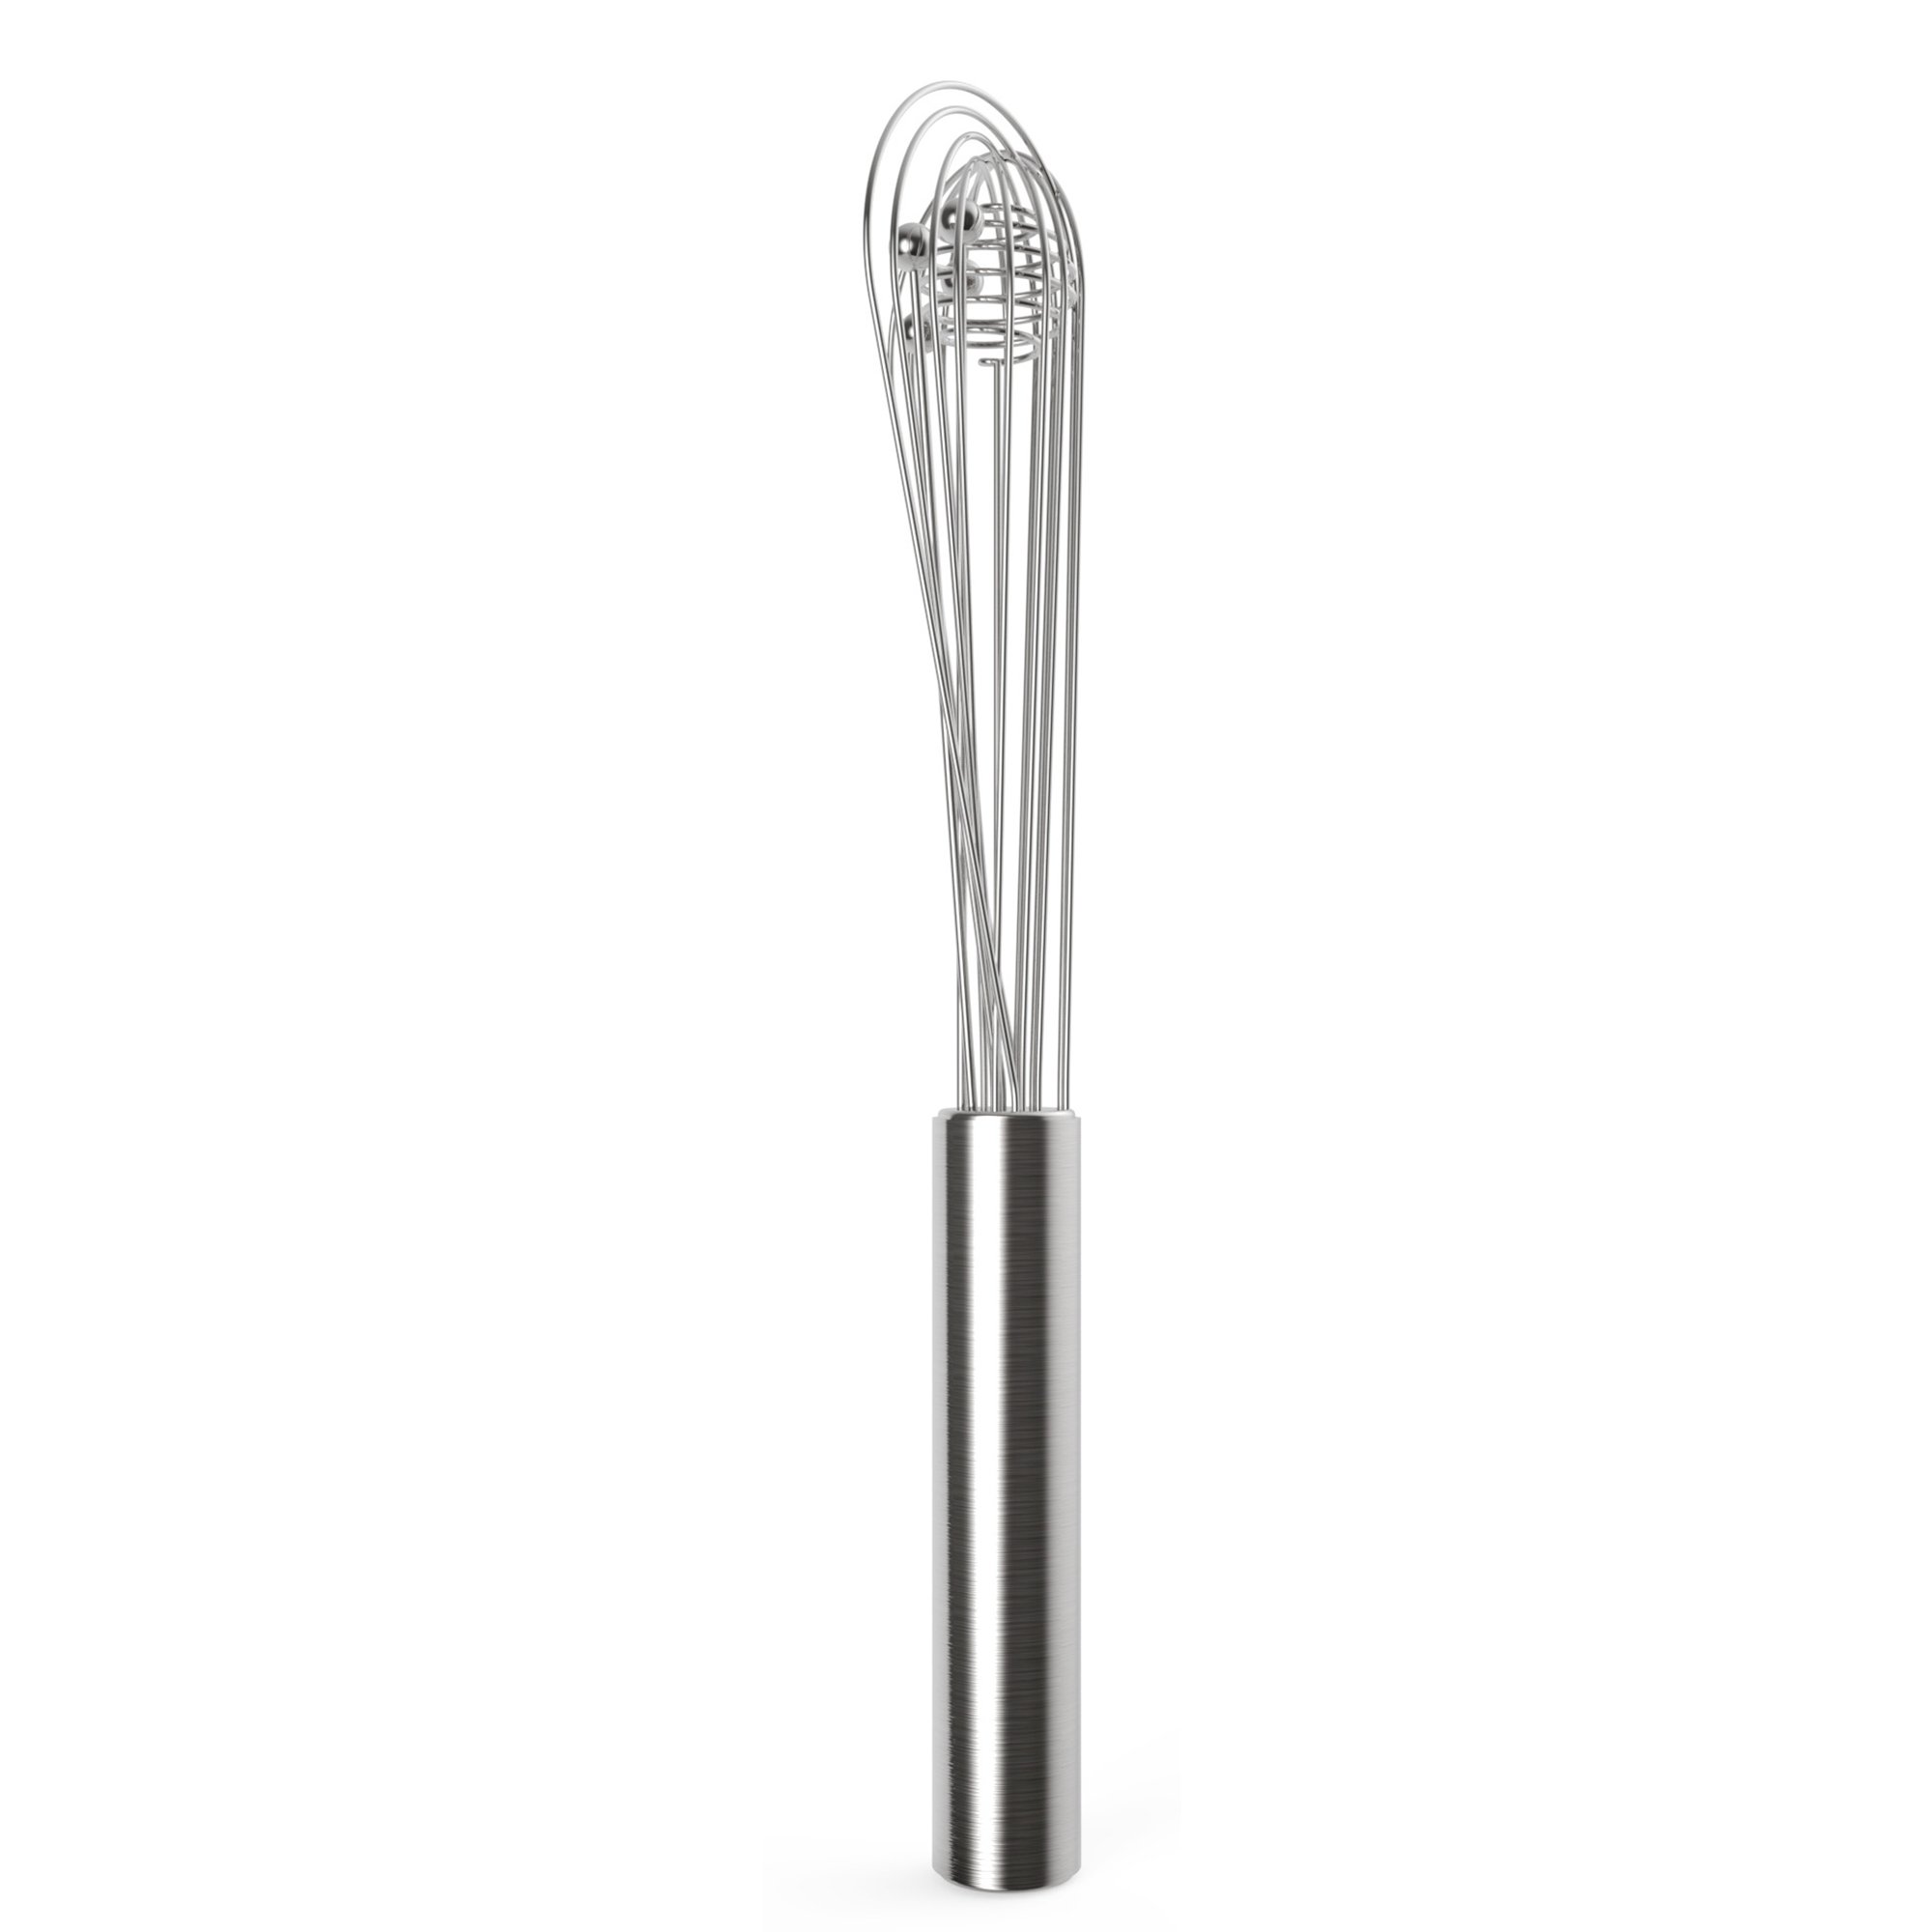 STONELINE® Turbo Whisk 30.5 cm with Mixer Balls, Stainless Steel